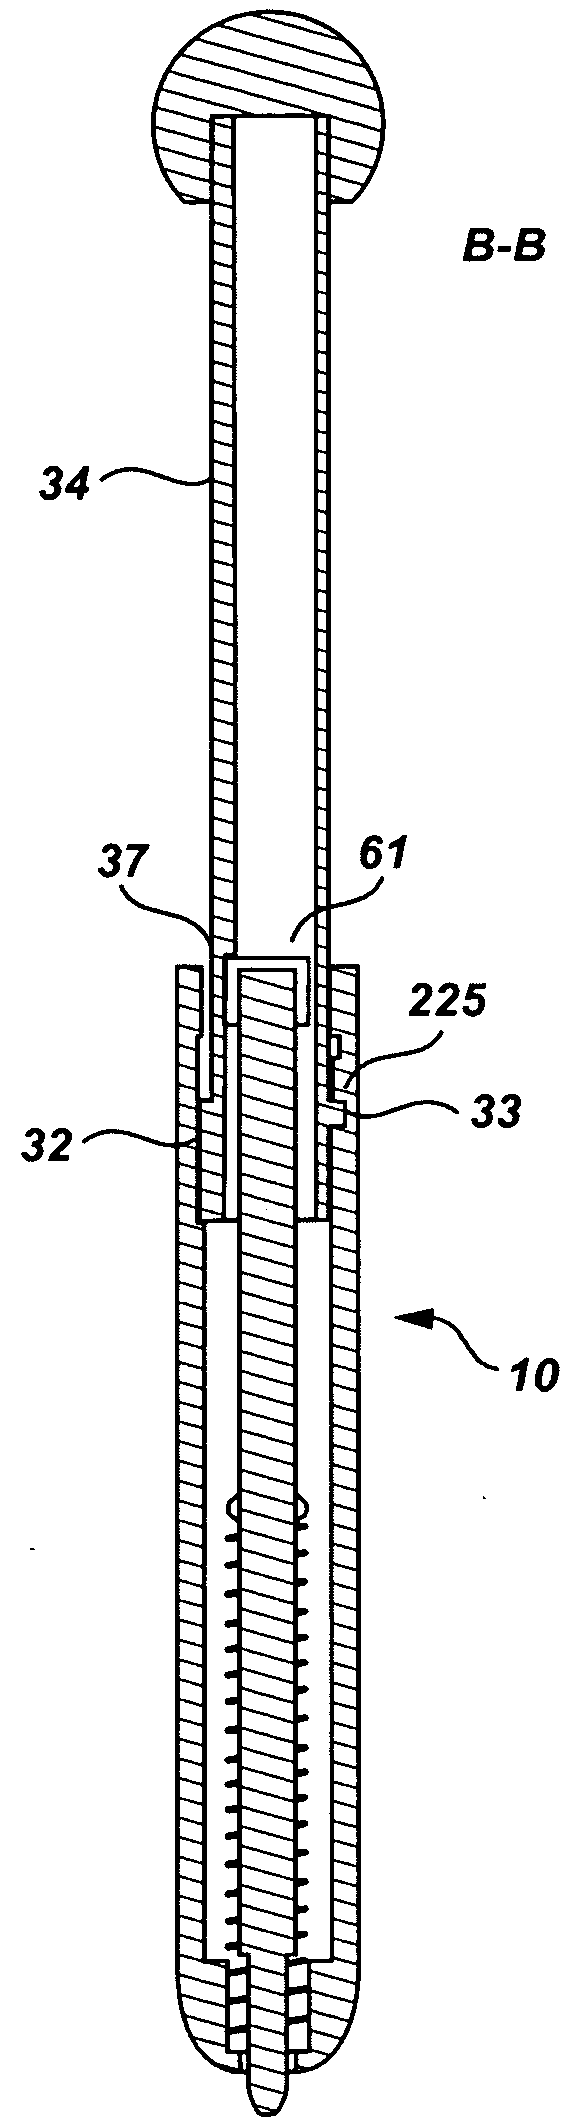 Writing instrument for hand-held devices